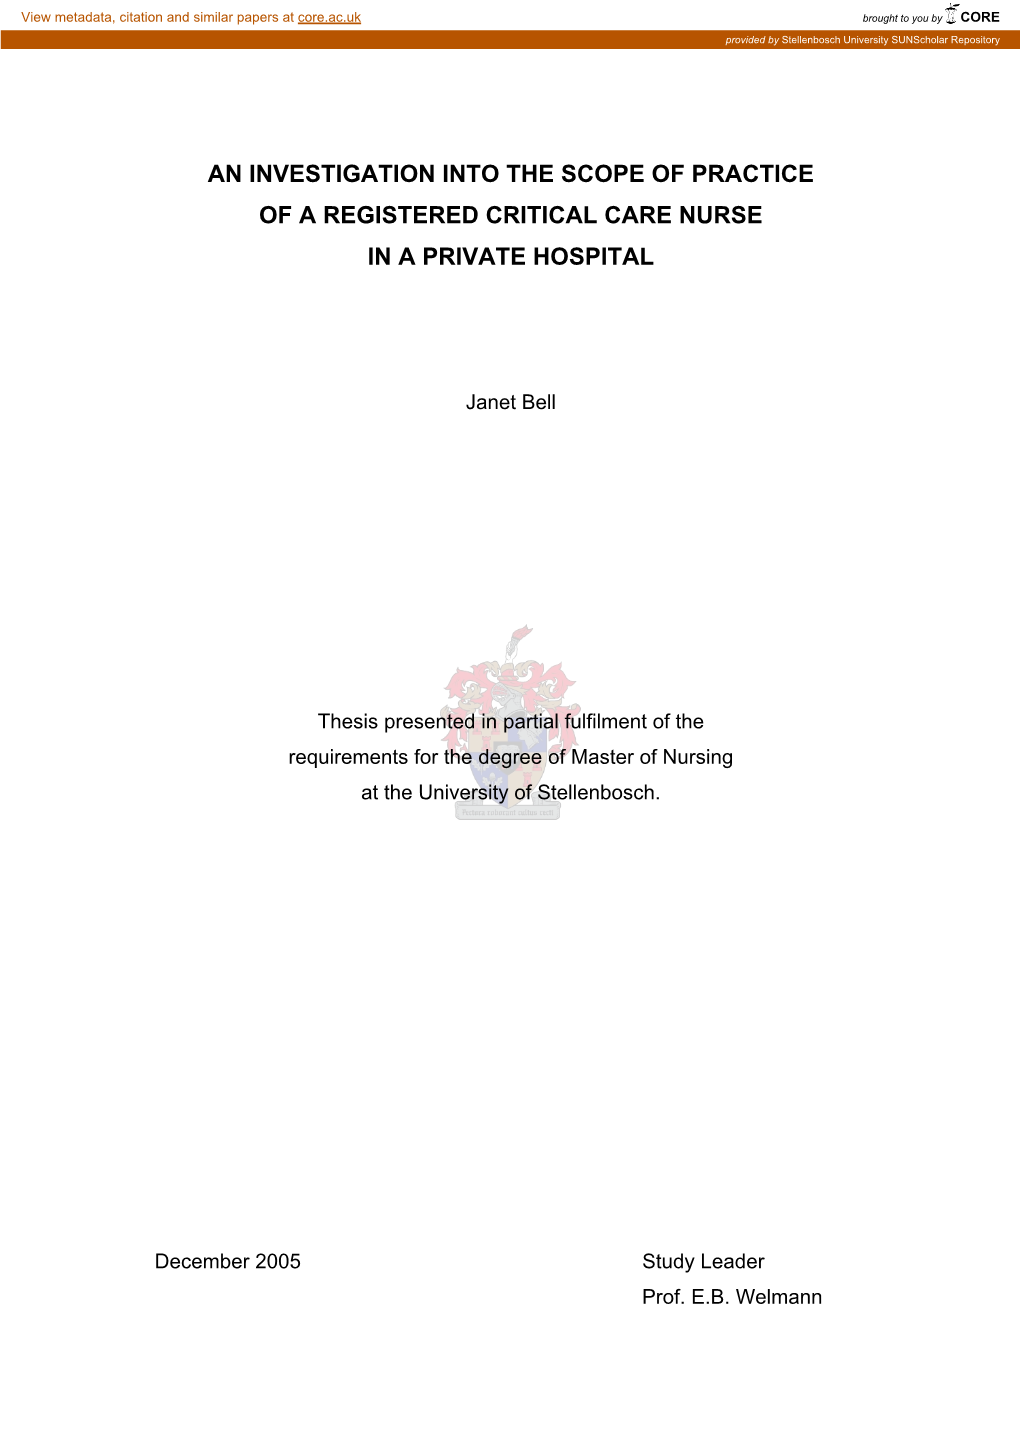 An Investigation Into the Scope of Practice of a Registered Critical Care Nurse in a Private Hospital